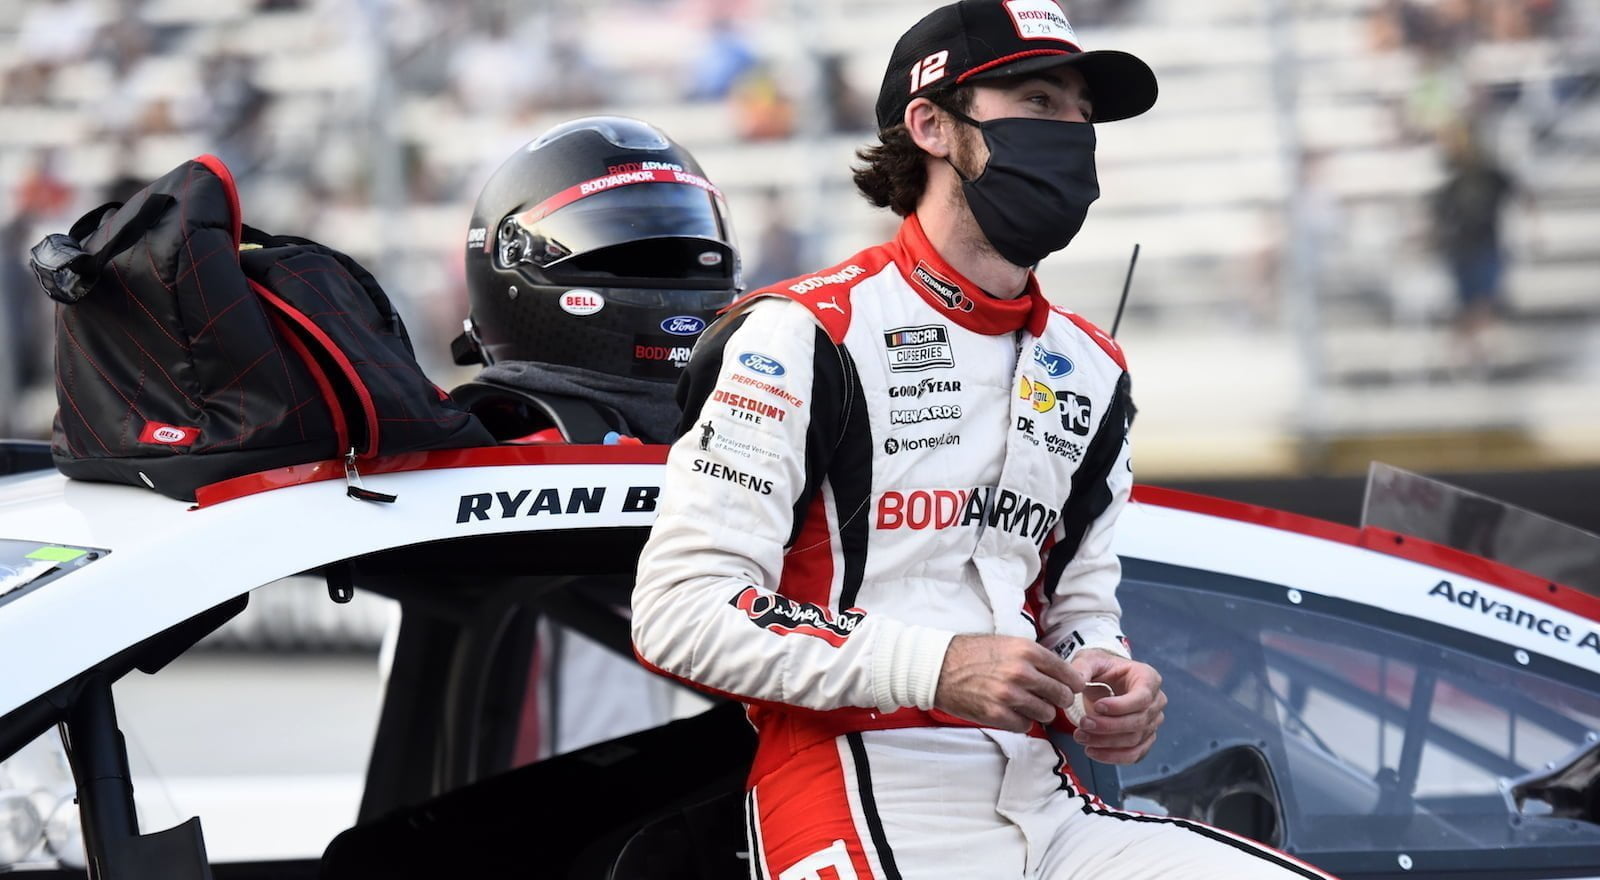 Playoff participant Blaney penalized before Southern 500